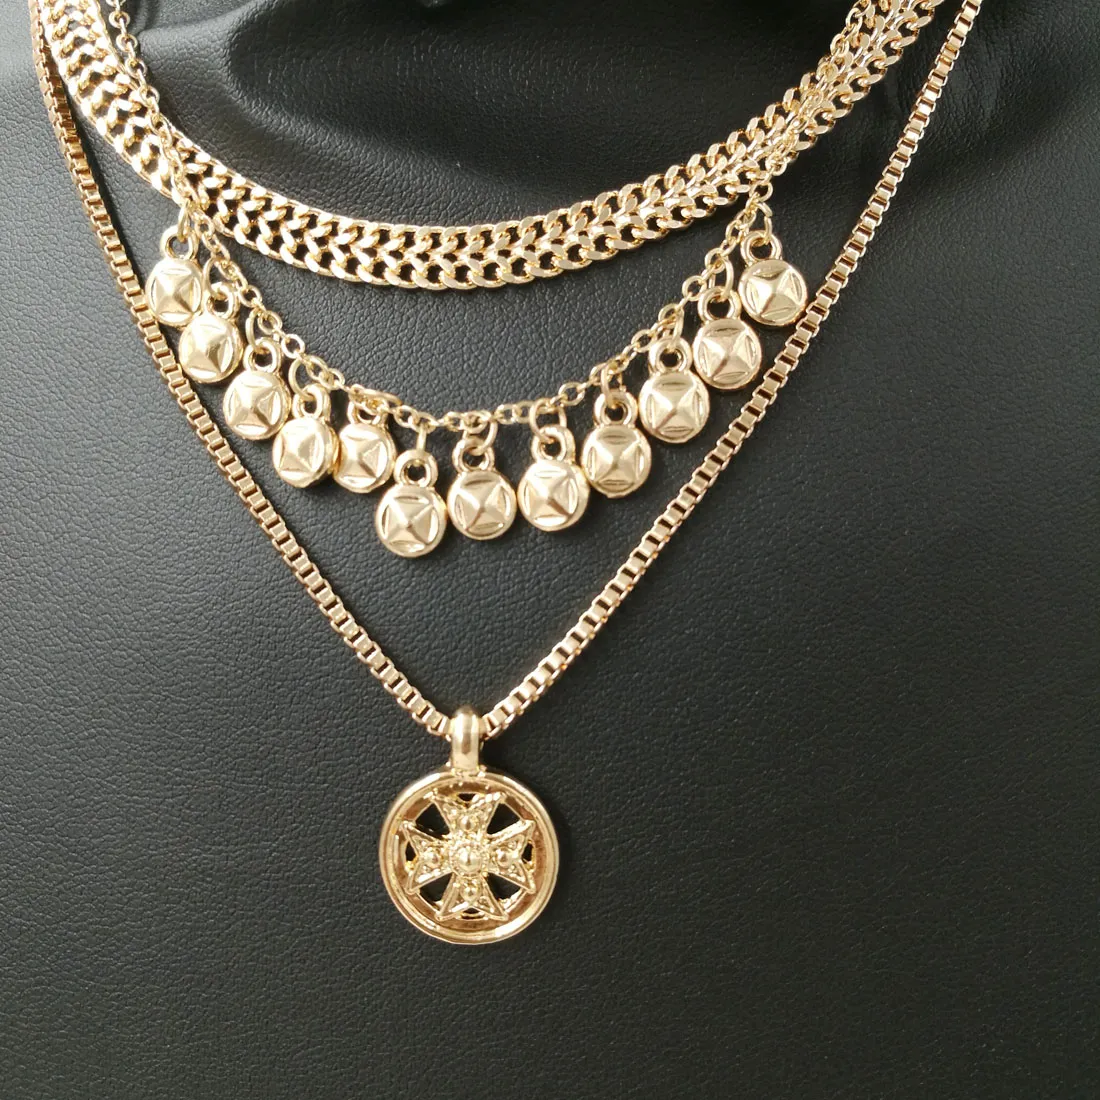 Fashion Brand Punk Metal chain coin chokers necklaces for Women Vintage jewelry Gold Pendants Necklaces chunky necklace4420970